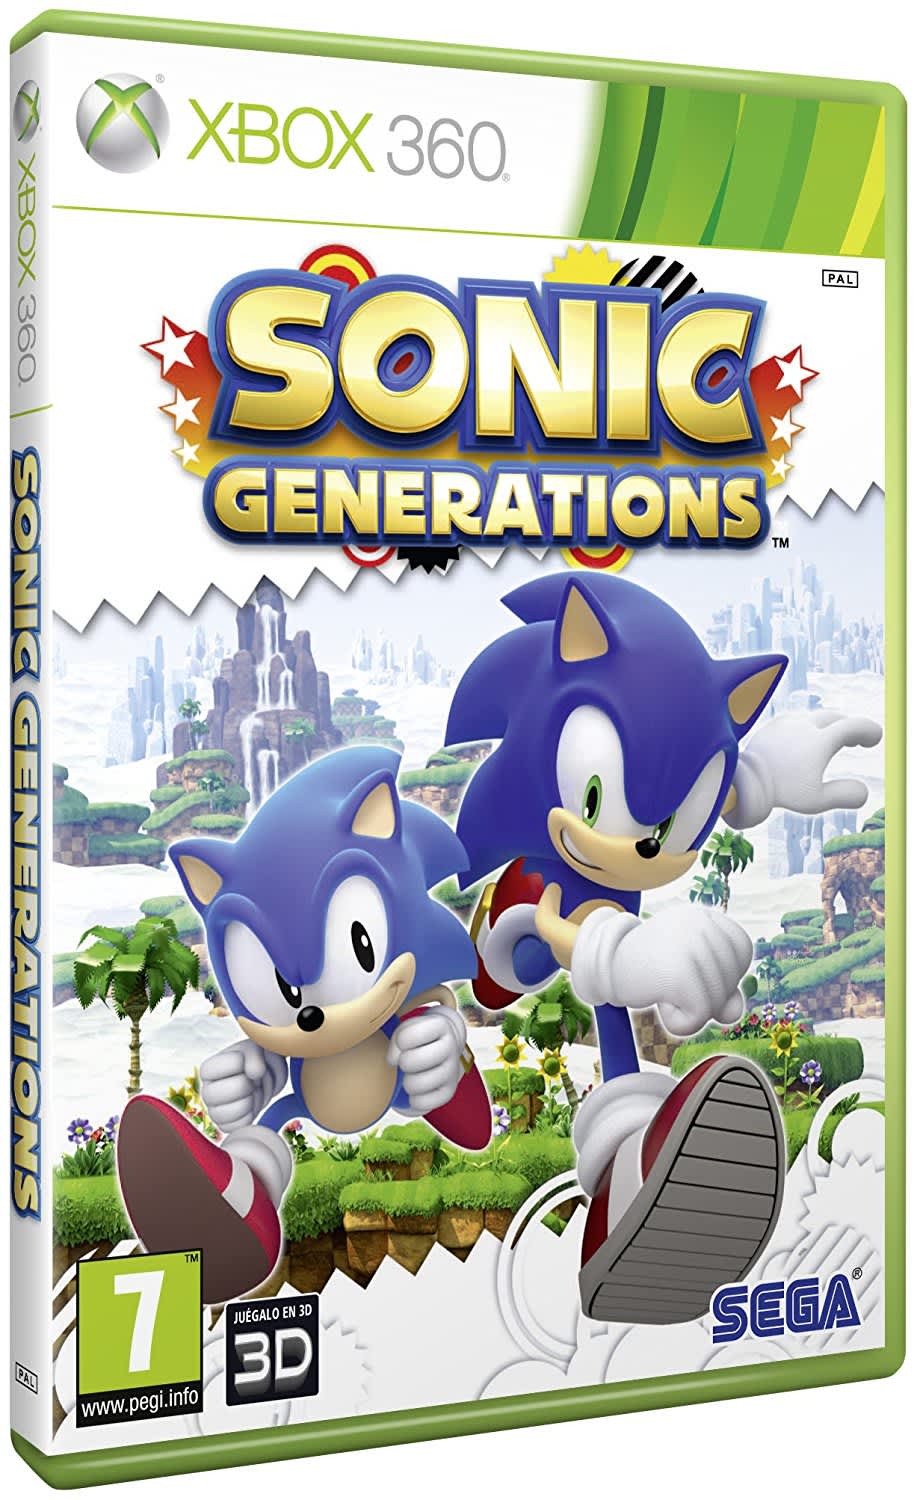 Sonic The Hedgehog has been relisted on Xbox 360 Marketplace ($5